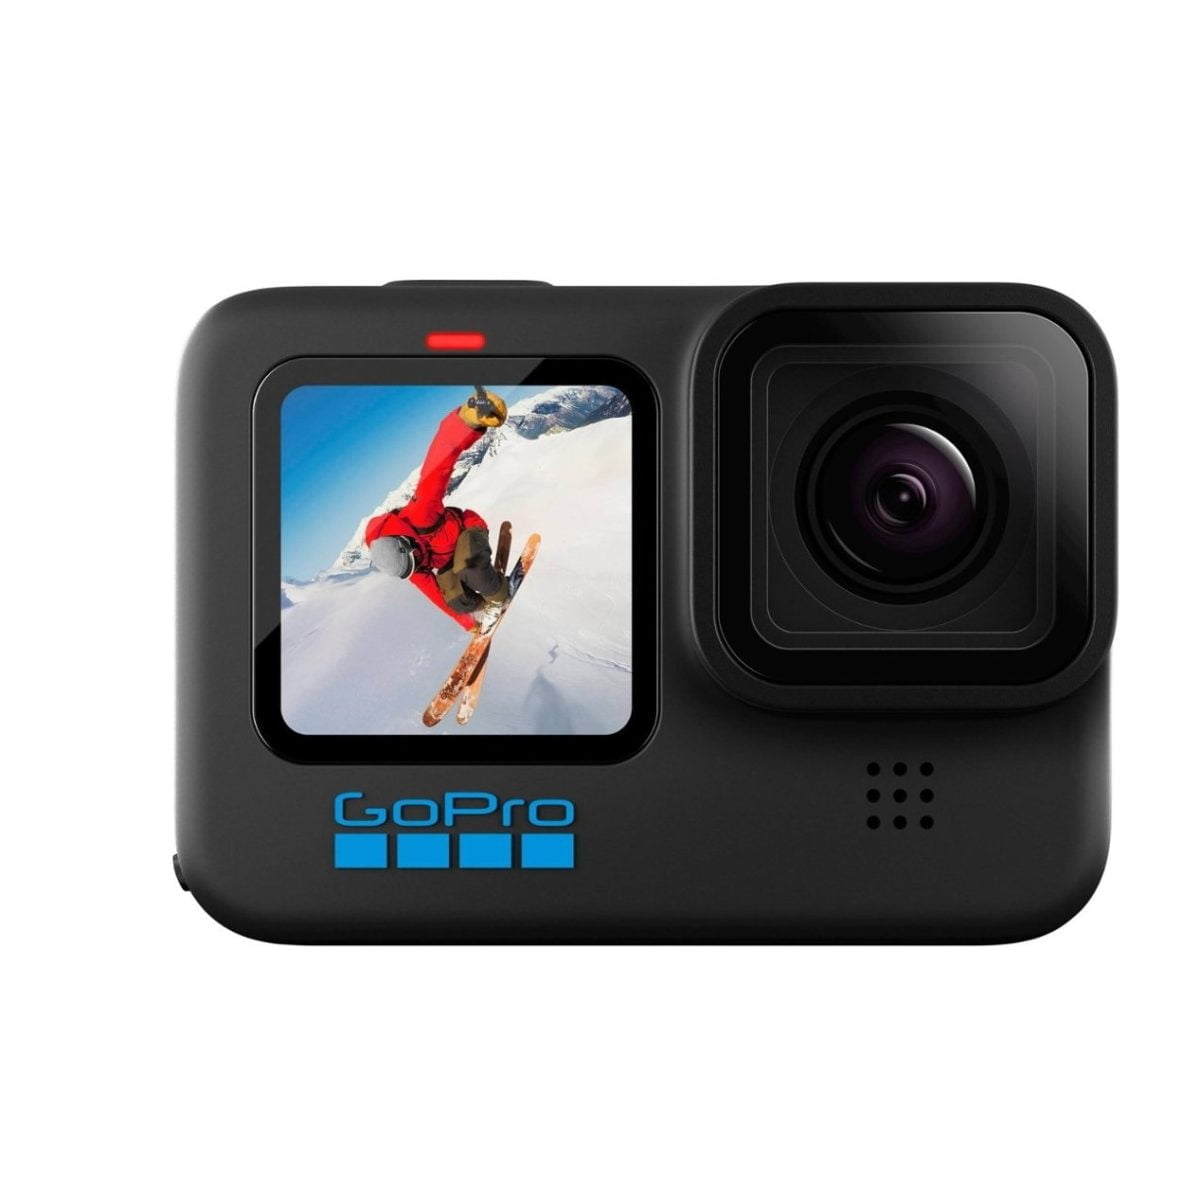 6474501Cv11D Gopro &Lt;H1&Gt;Gopro Hero10 Action Camera Black (Stabilization Hyper Smooth 4.0)&Lt;/H1&Gt; Https://Www.youtube.com/Watch?V=Jgmiyzcpnse Capture Quality Vlogs With This Black Gopro Hero10 Camera. The Removable Rechargeable 1720 Mah Battery Offers Long Shooting Periods, While The Rugged, Waterproof Design Allows Flexible Use On Different Terrains. This Gopro Hero10 Camera Features A 1.4-Inch Screen For Framing Shots Seamlessly, And The 23Mp Sensor Captures 5.3K Videos Effortlessly. Gopro Hero10 Gopro Hero10 Action Camera Black